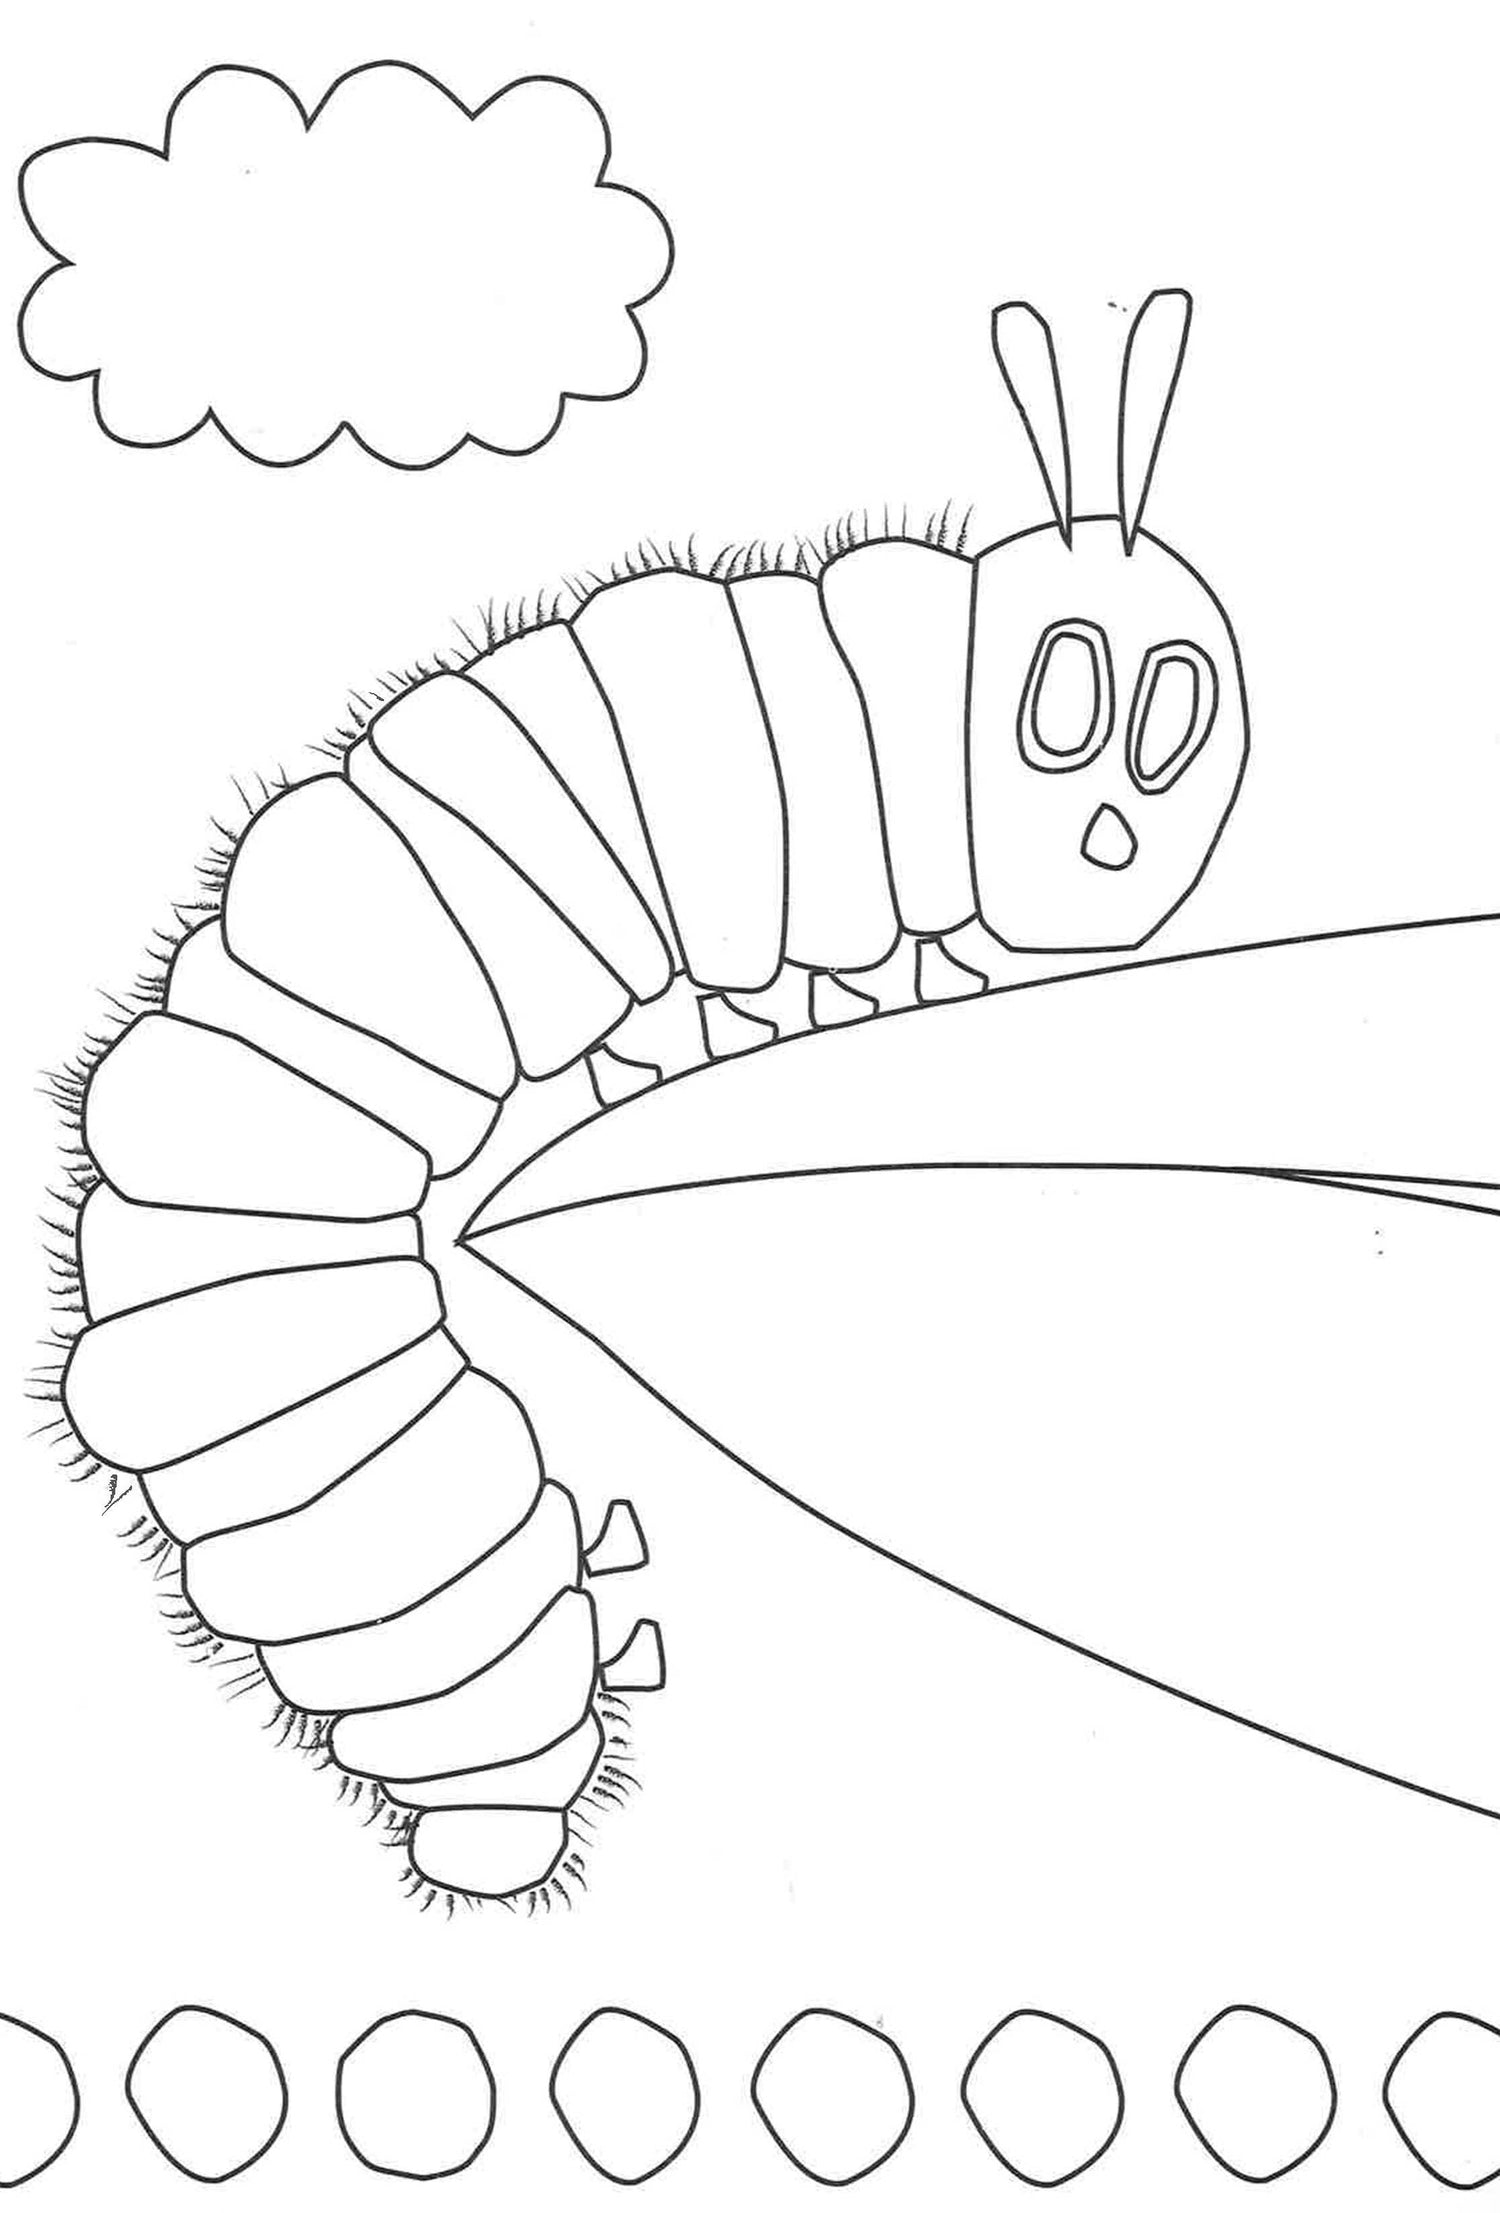 –　Friends　And　Jumbo　The　Caterpillar　Hungry　Colouring　Very　Pad:　BookXcess